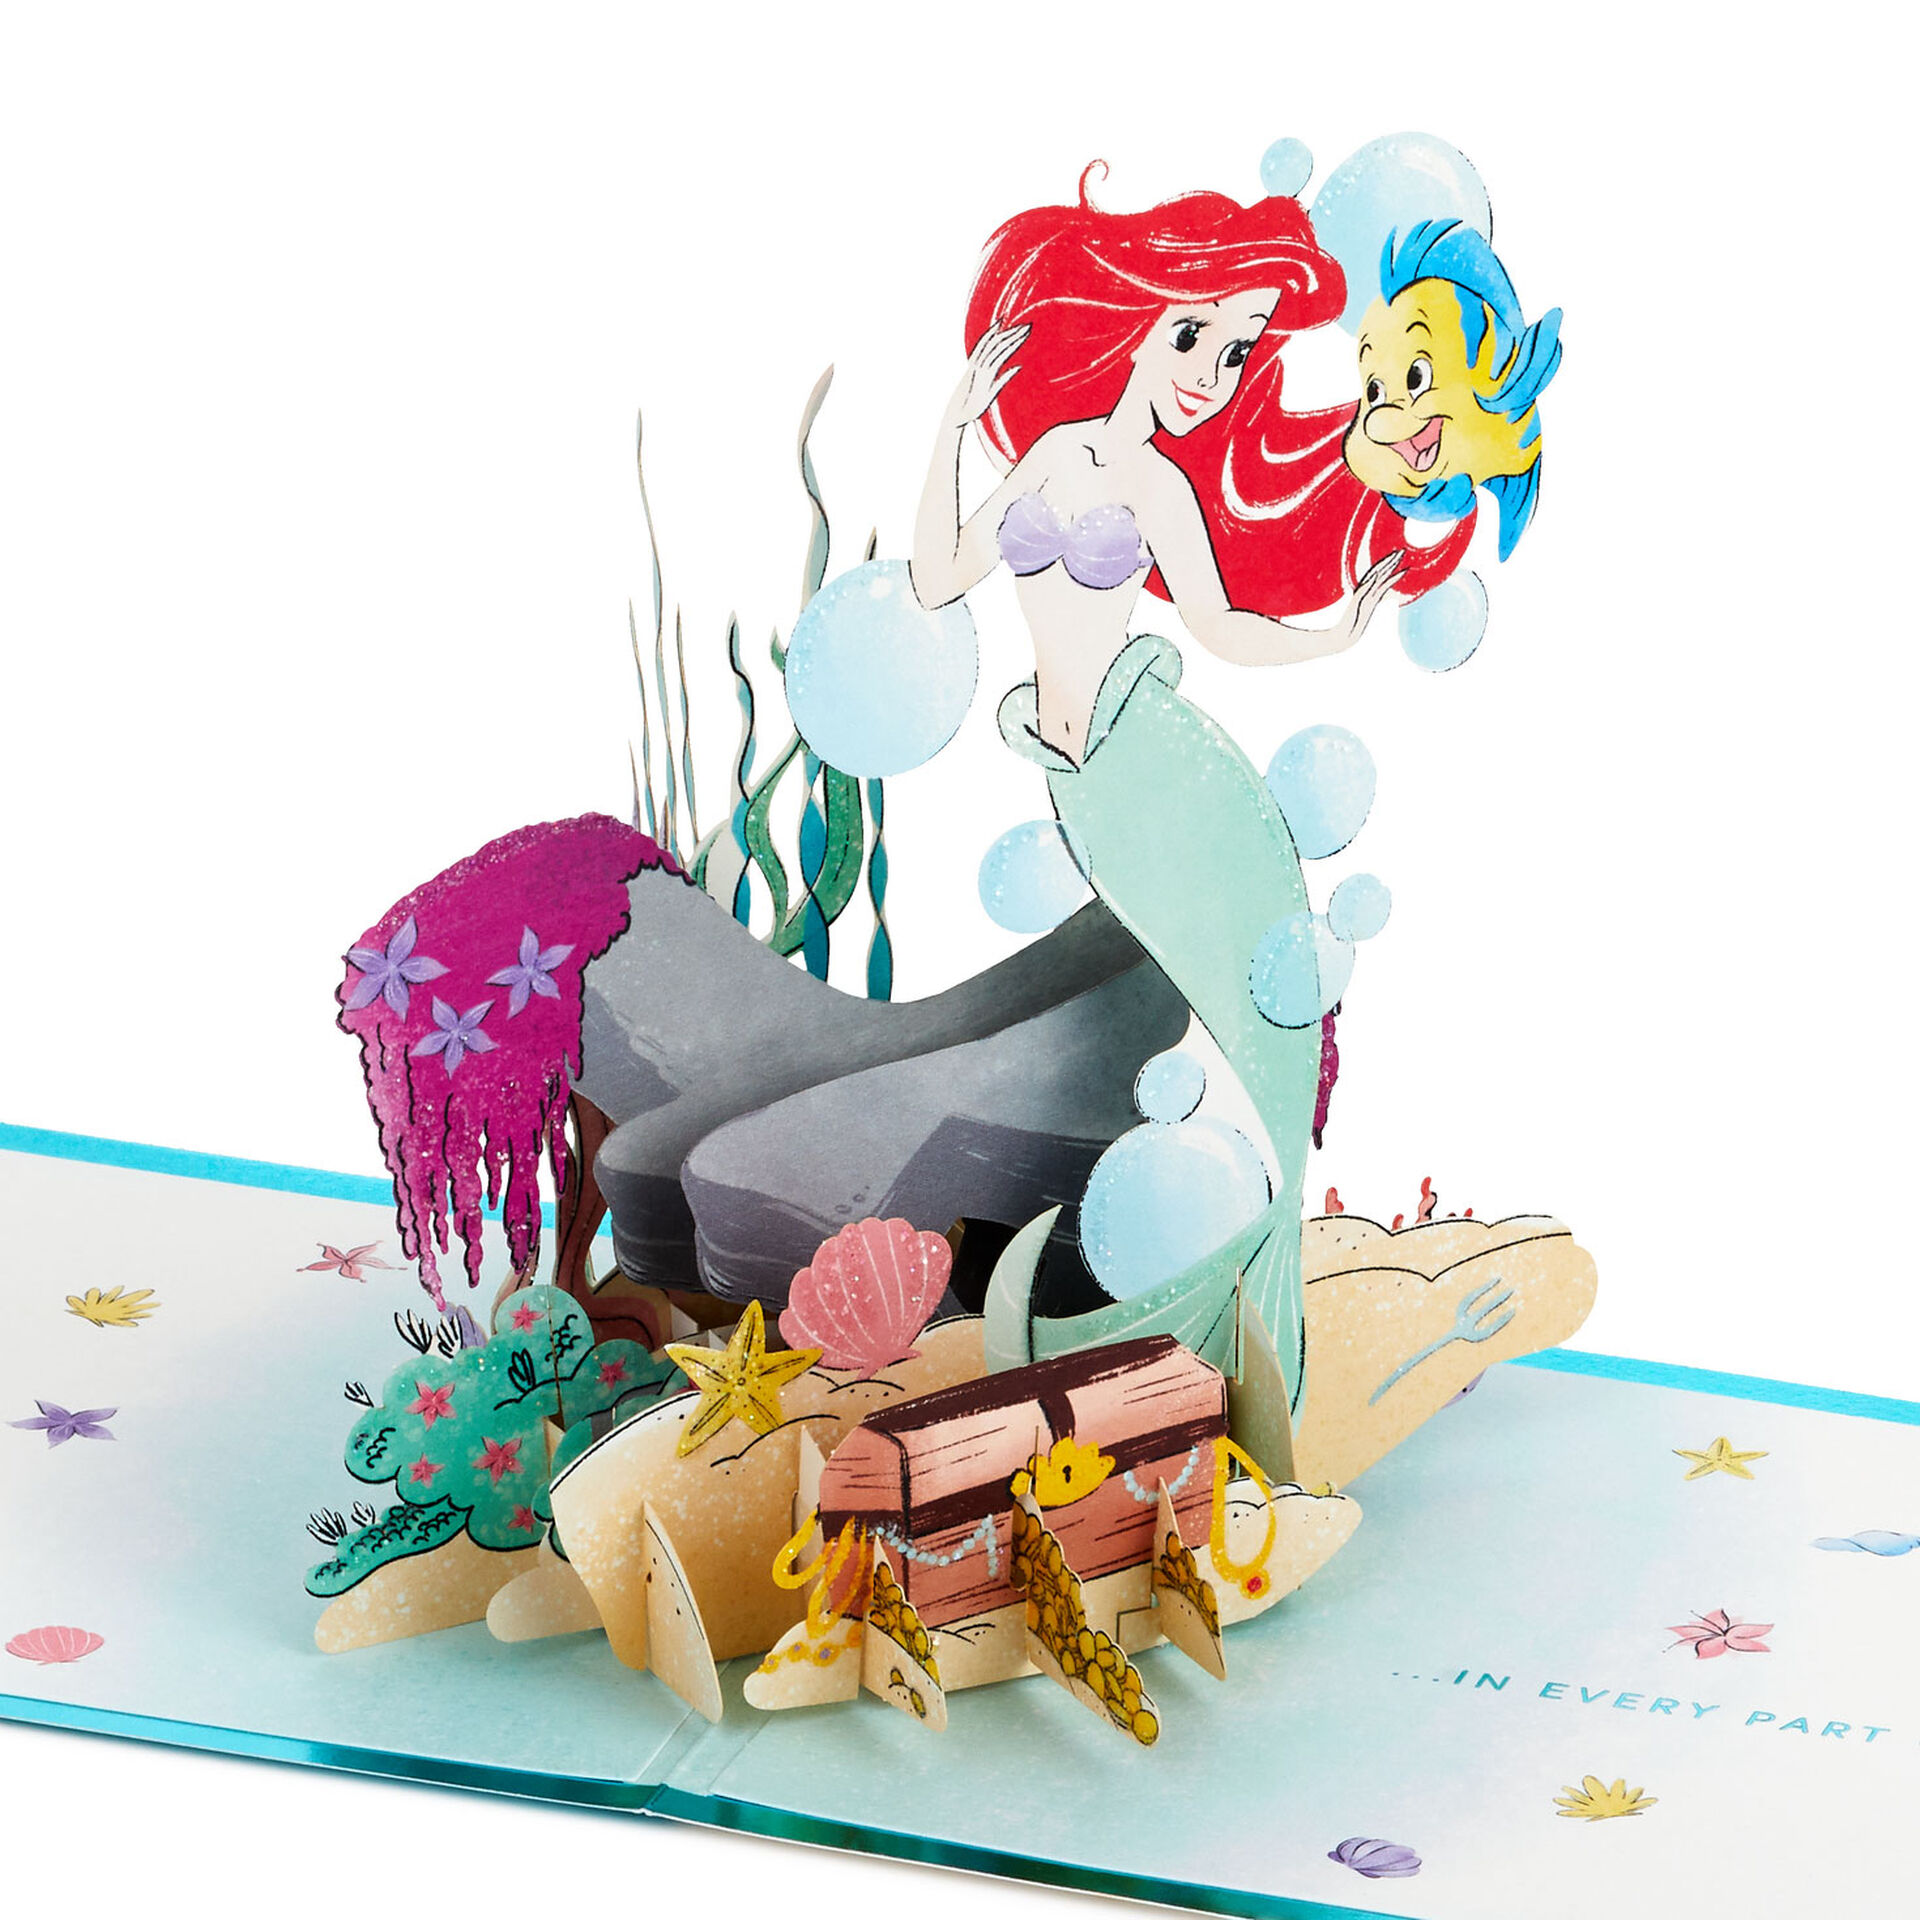 Disney-The-Little-Mermaid-Ariel-3D-PopUp-Card-for-Her_1499LAD2902_01